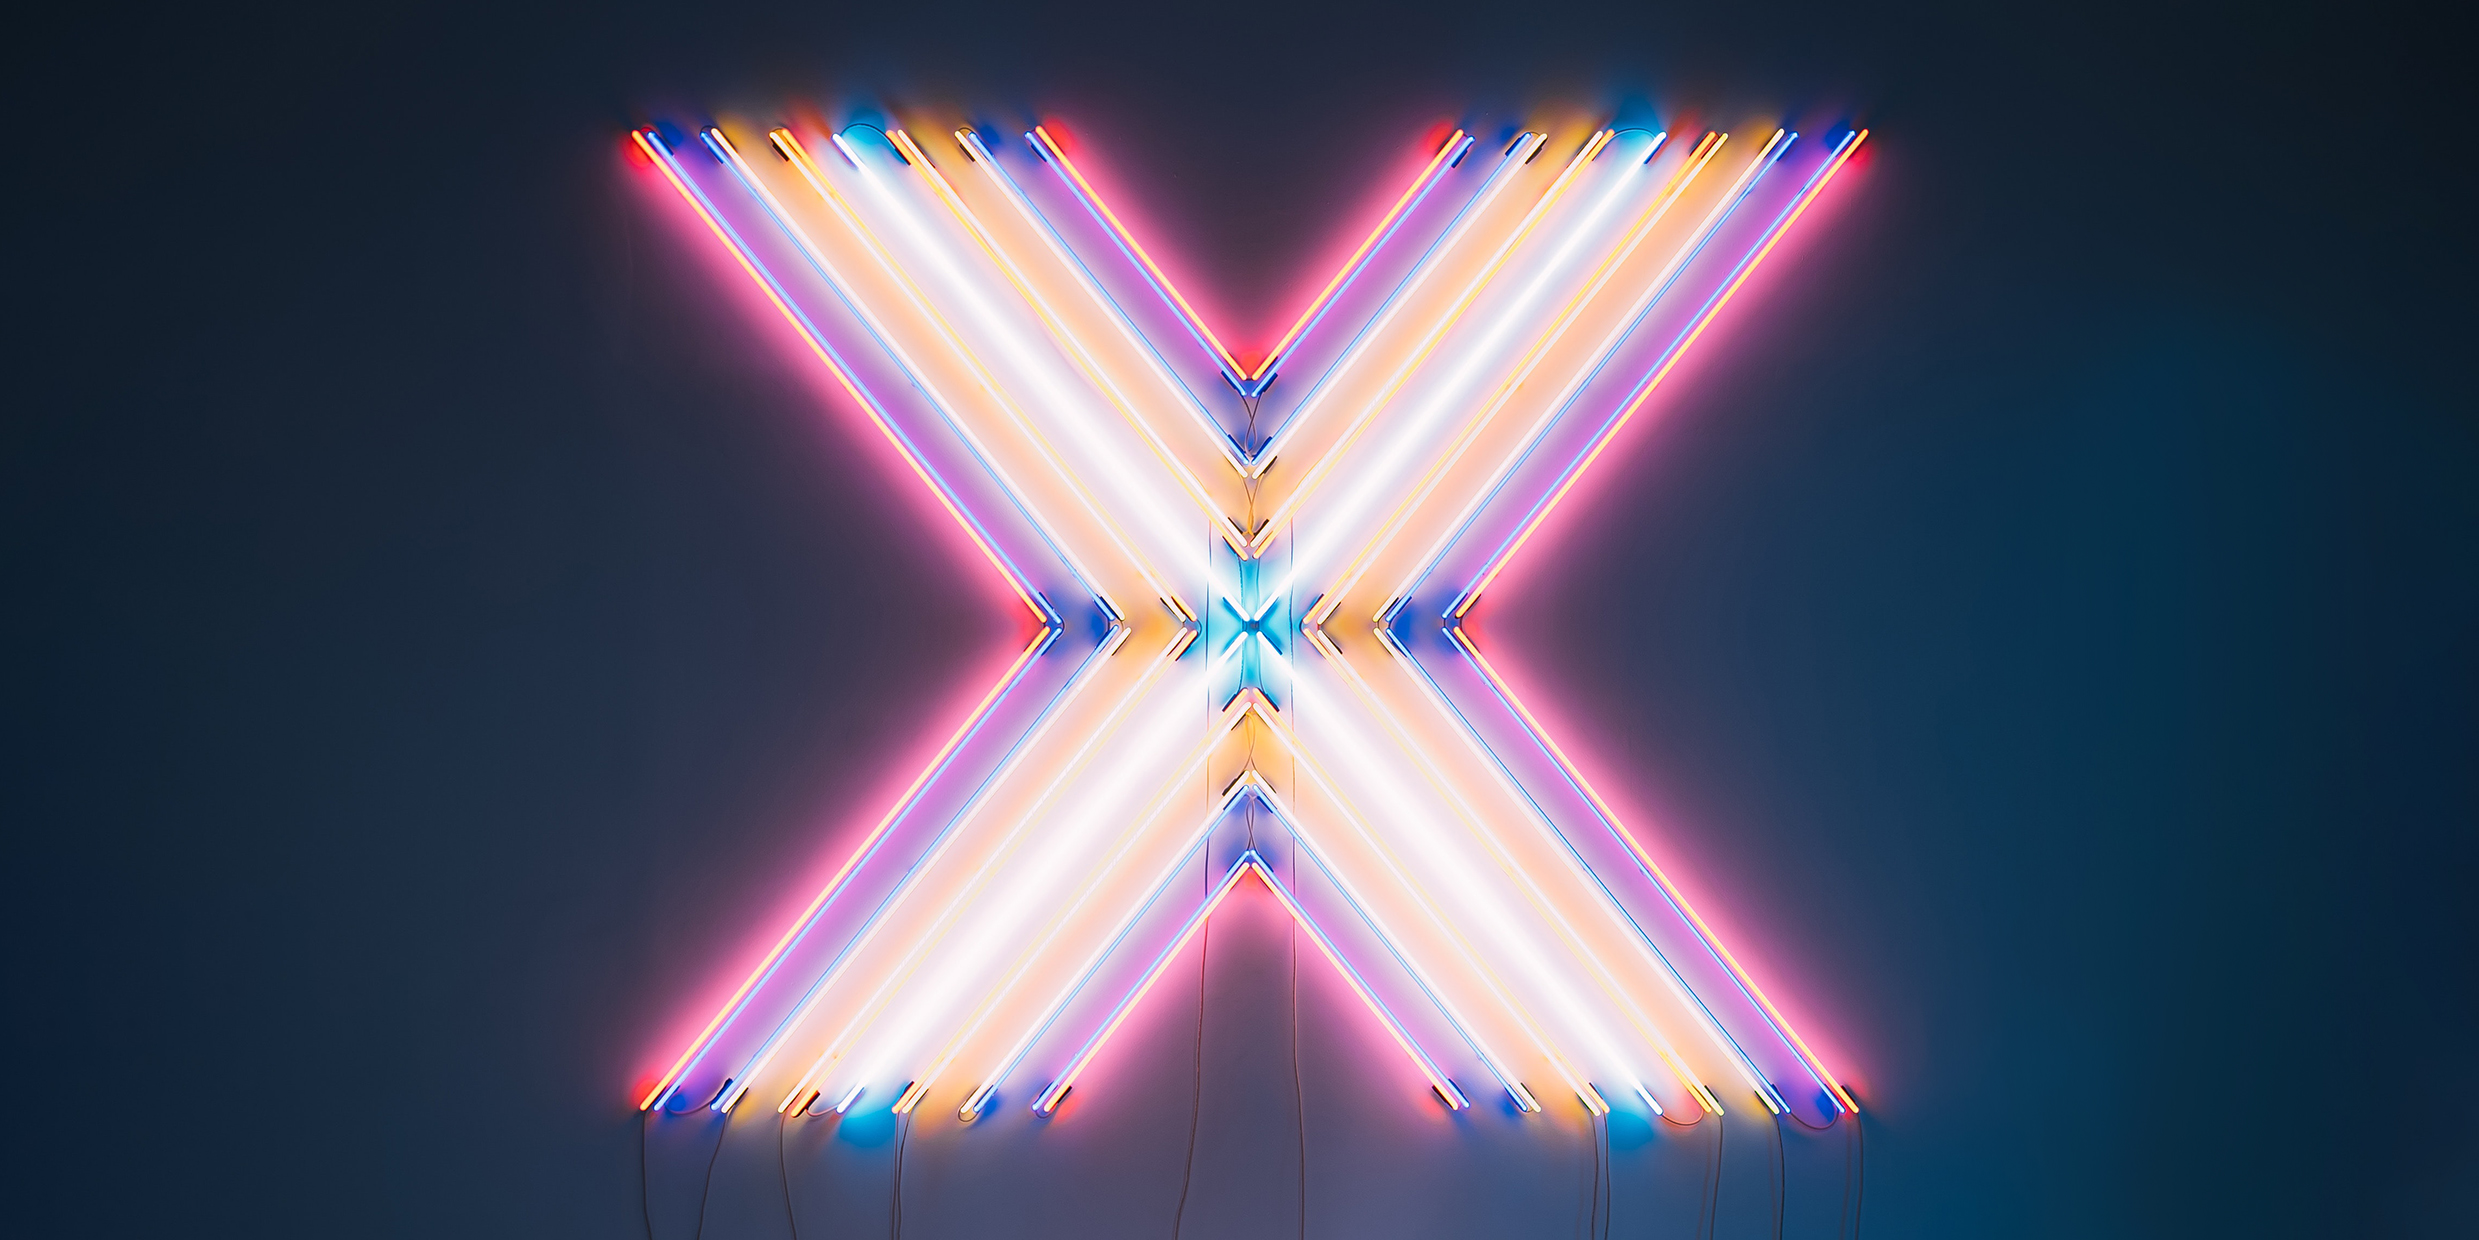 Image of large letter X made from neon lights